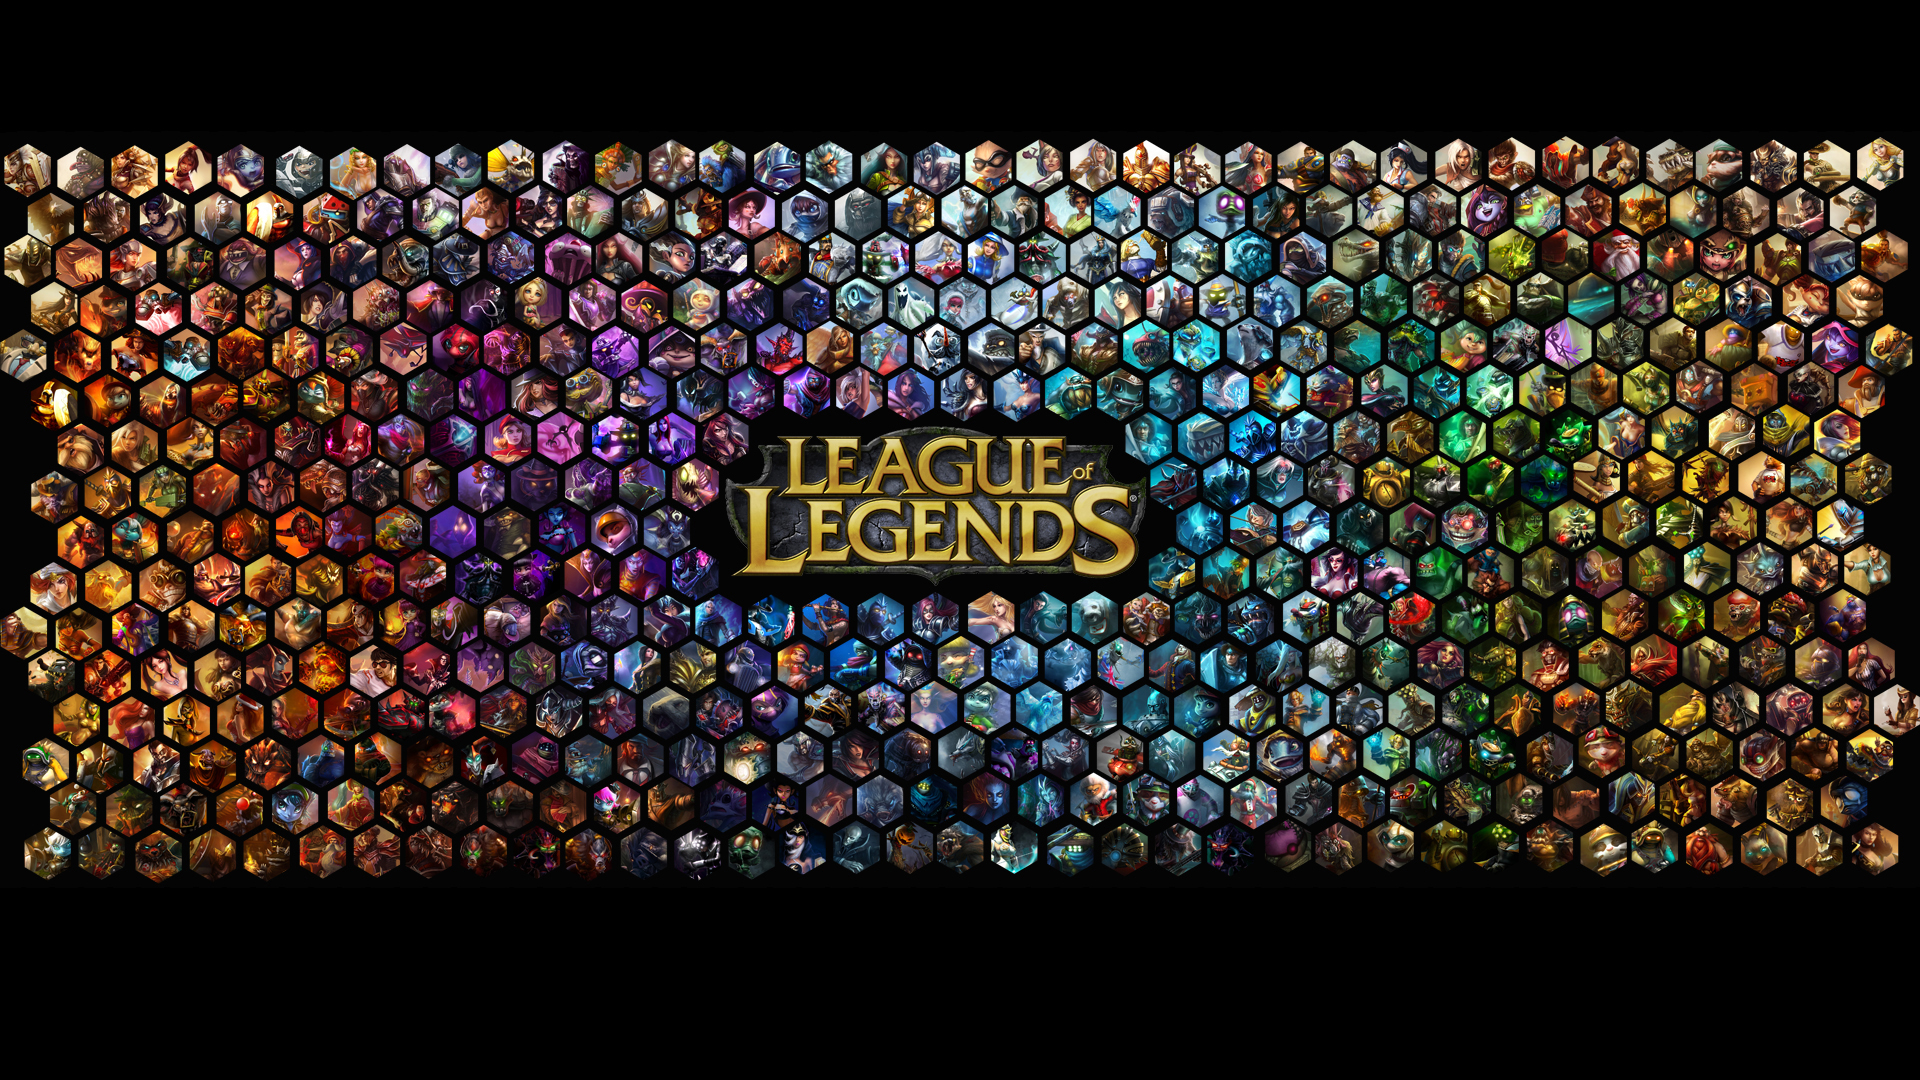 A Survey of League of Legends Champions from a Gendered Perspective